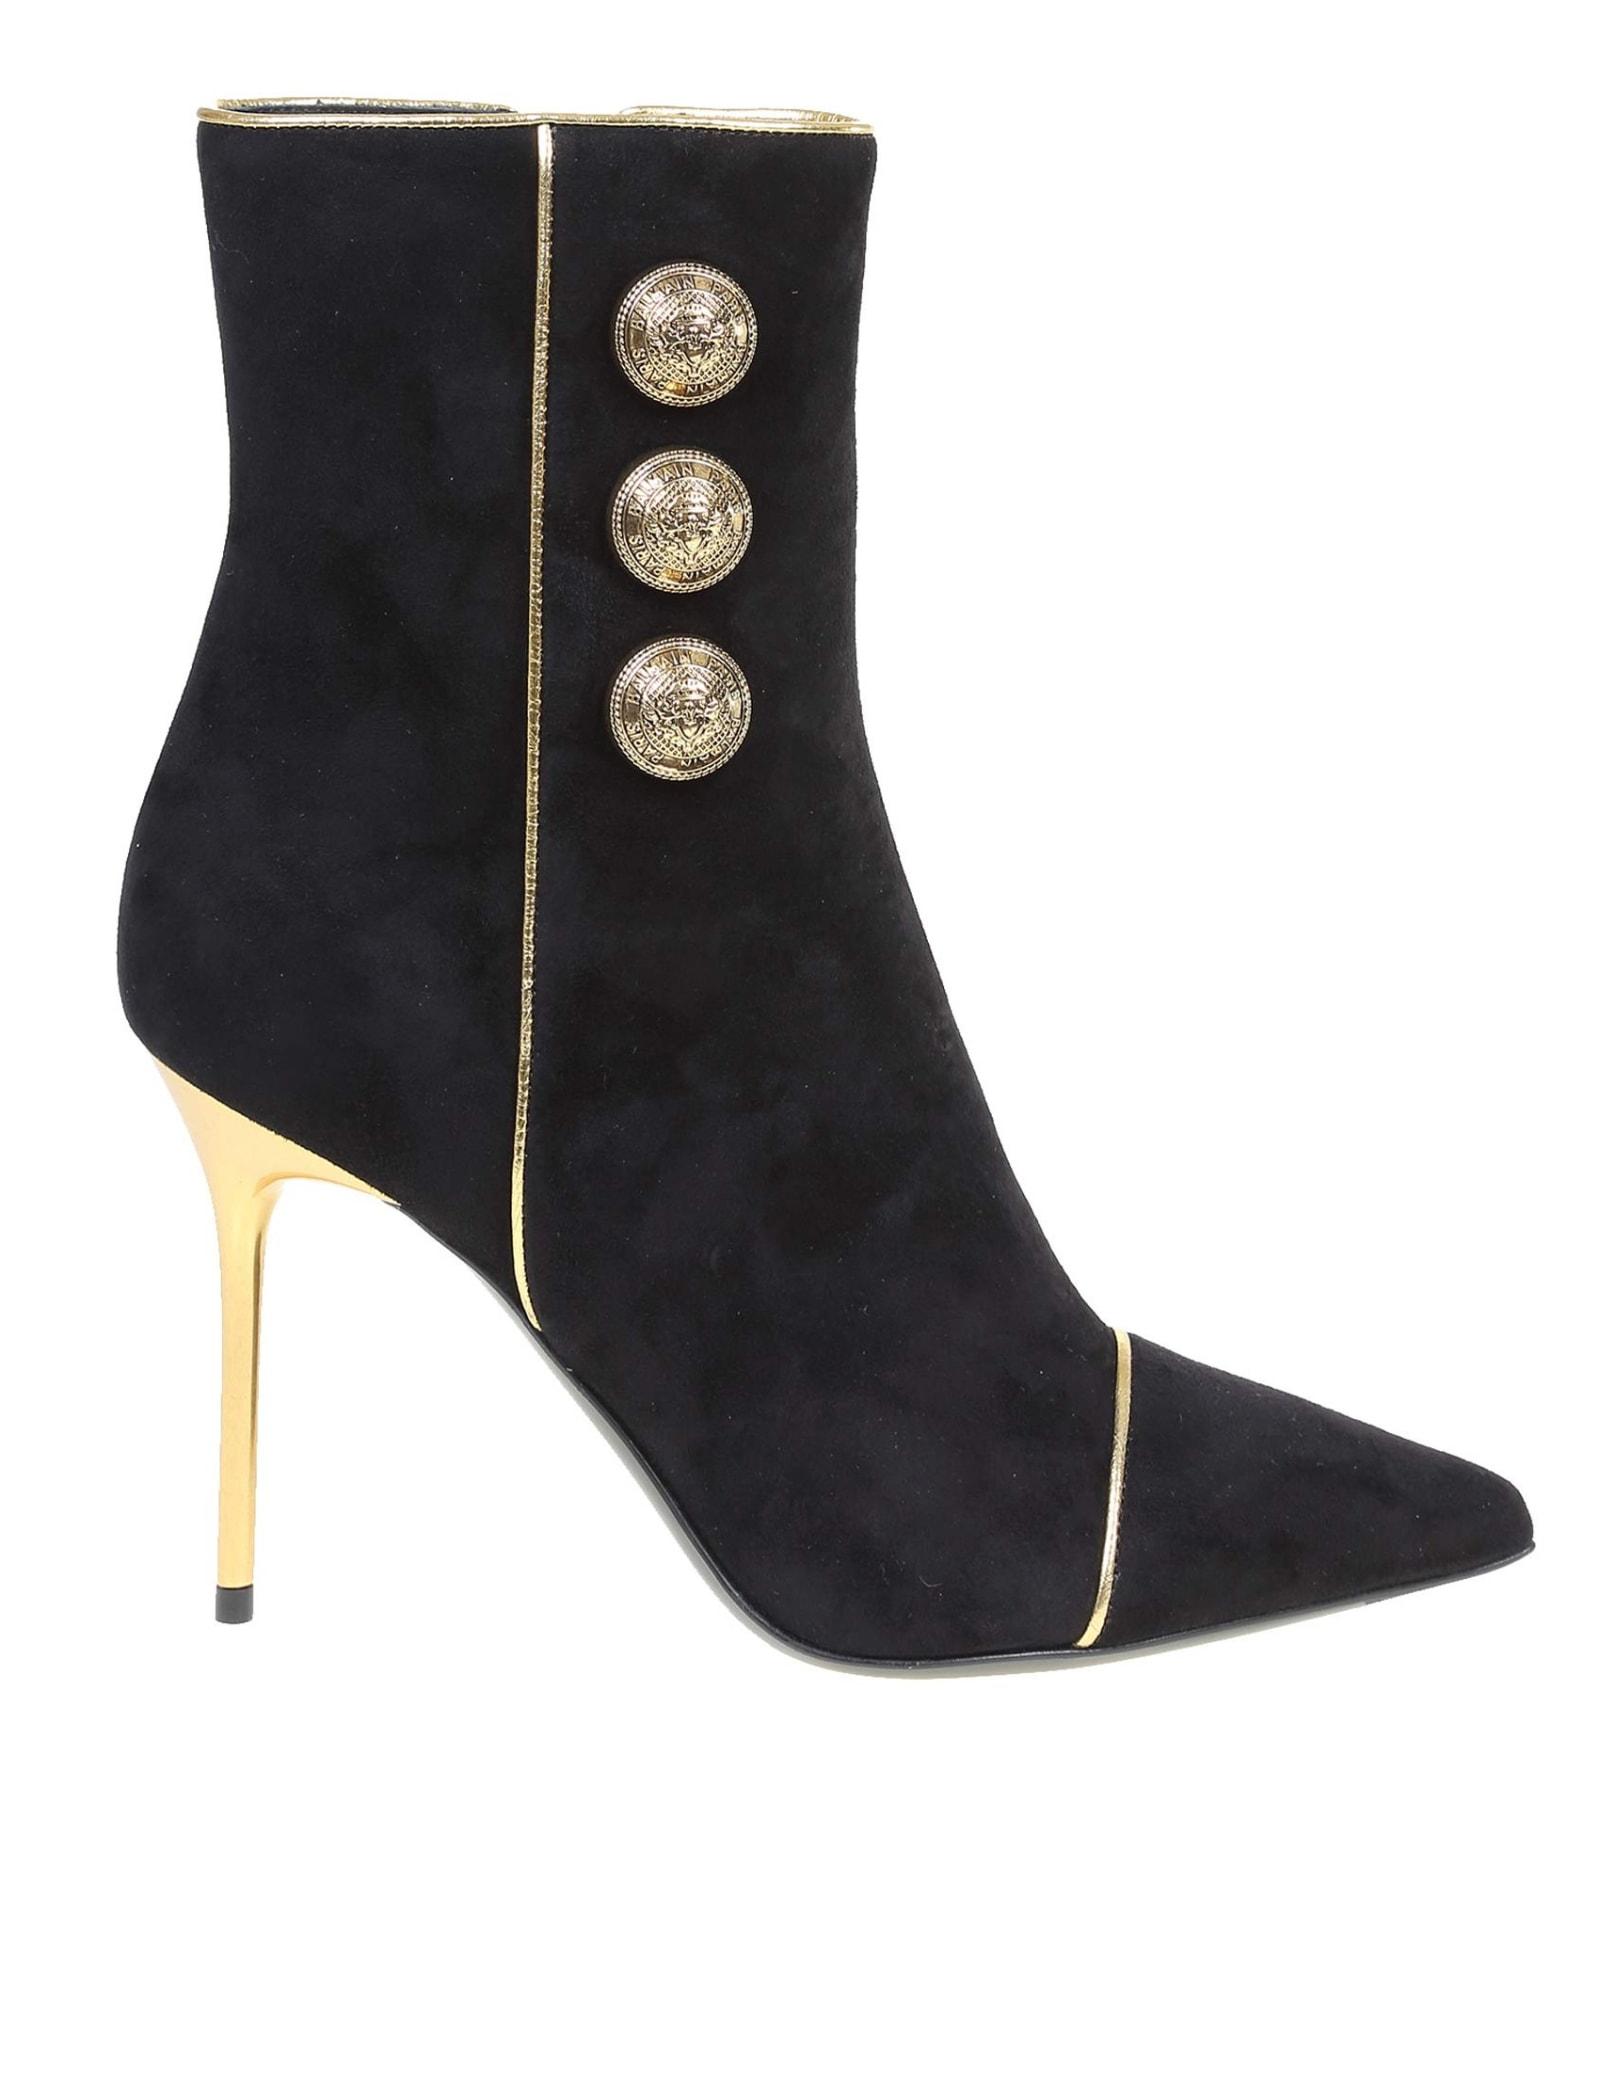 Balmain Roni Boots In Suede in Black/Gold (Black) - Save 46% | Lyst UK